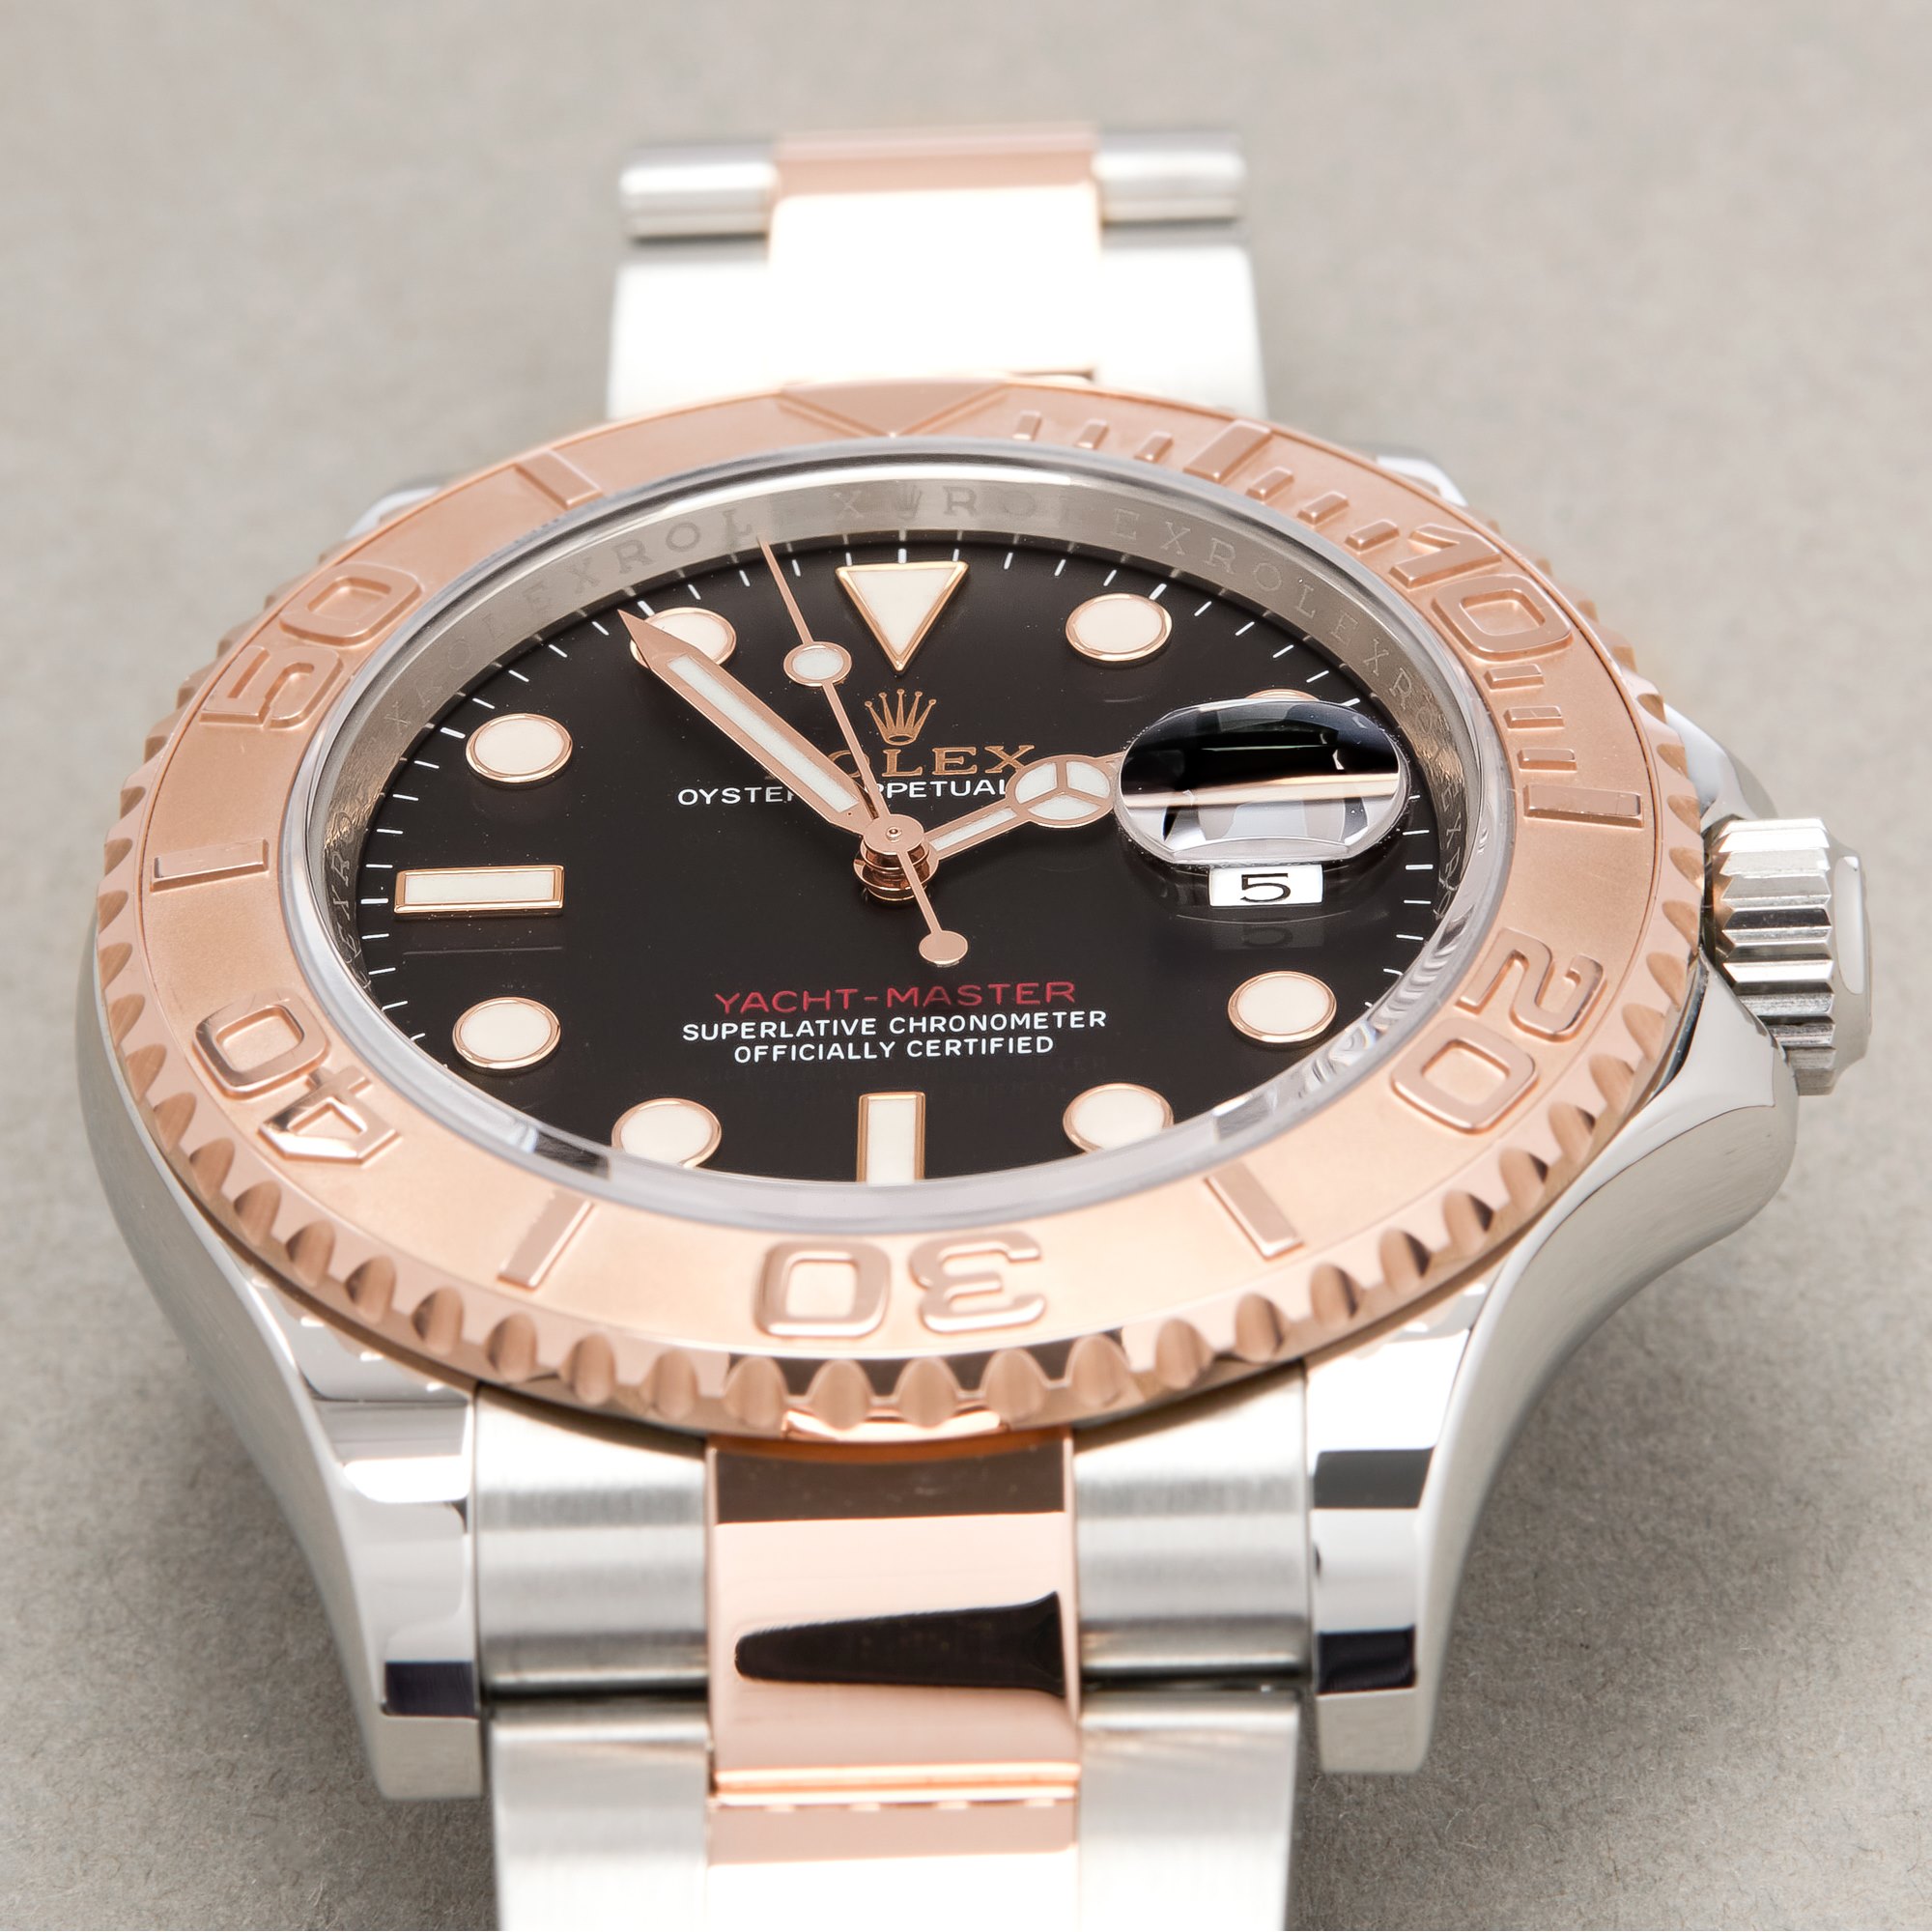 Rolex Yacht-Master Rose Gold & Stainless Steel 126621